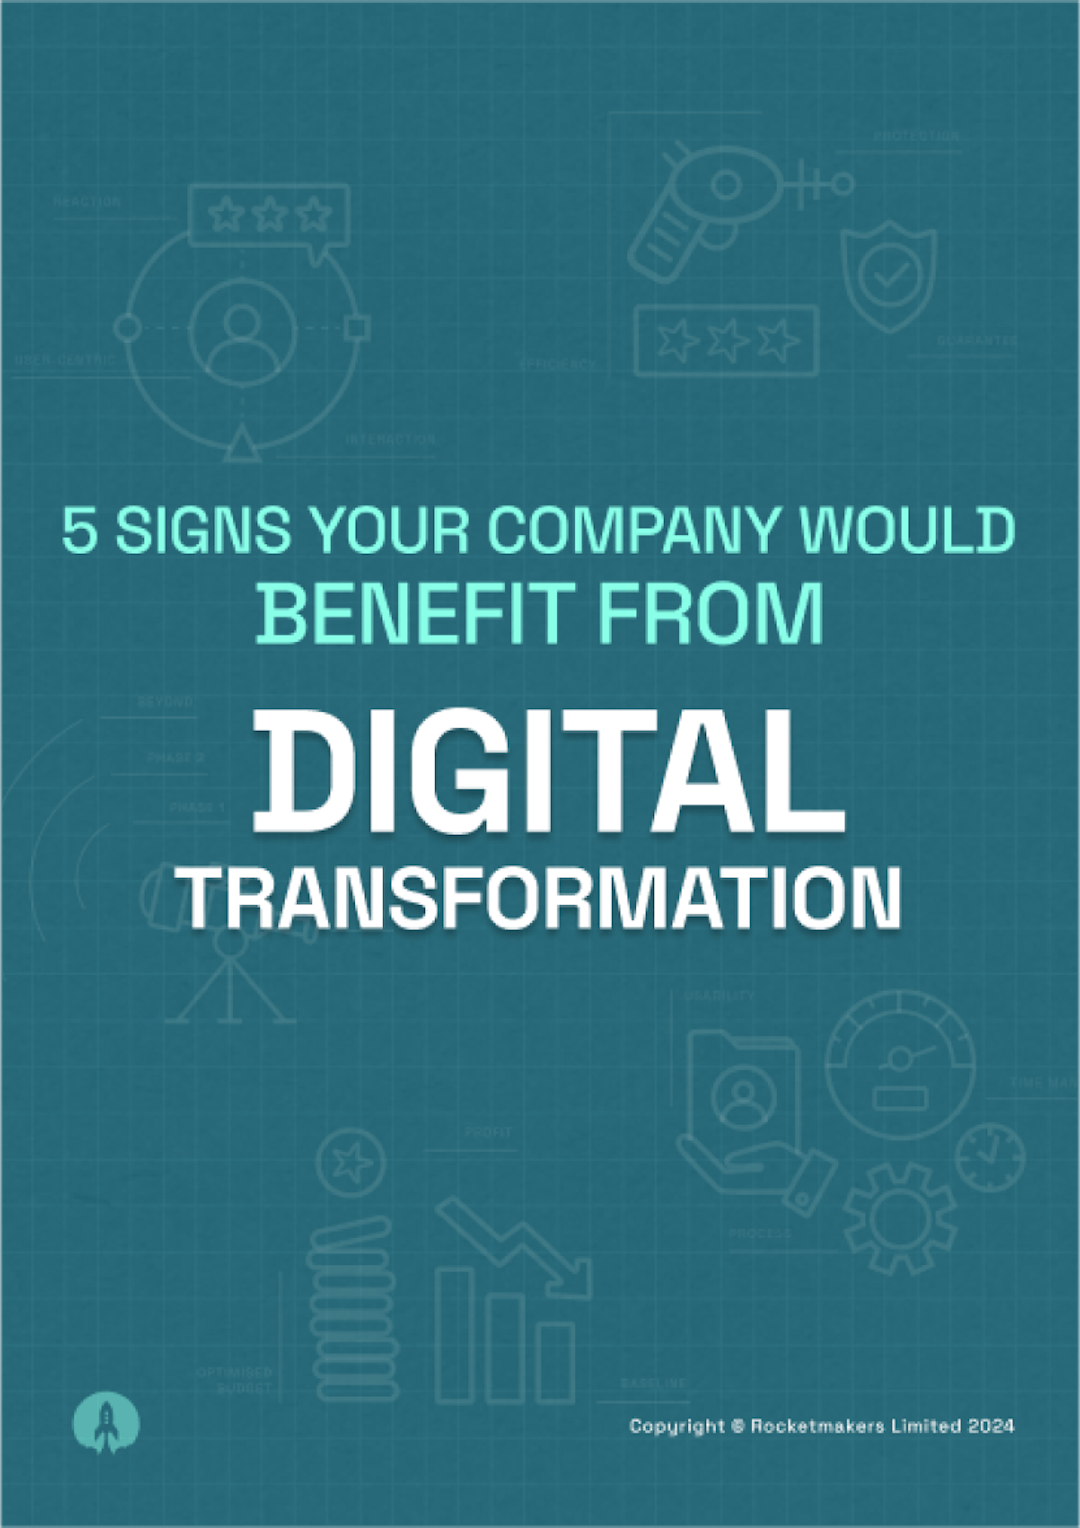 image of the front cover of the digital transformation ebook